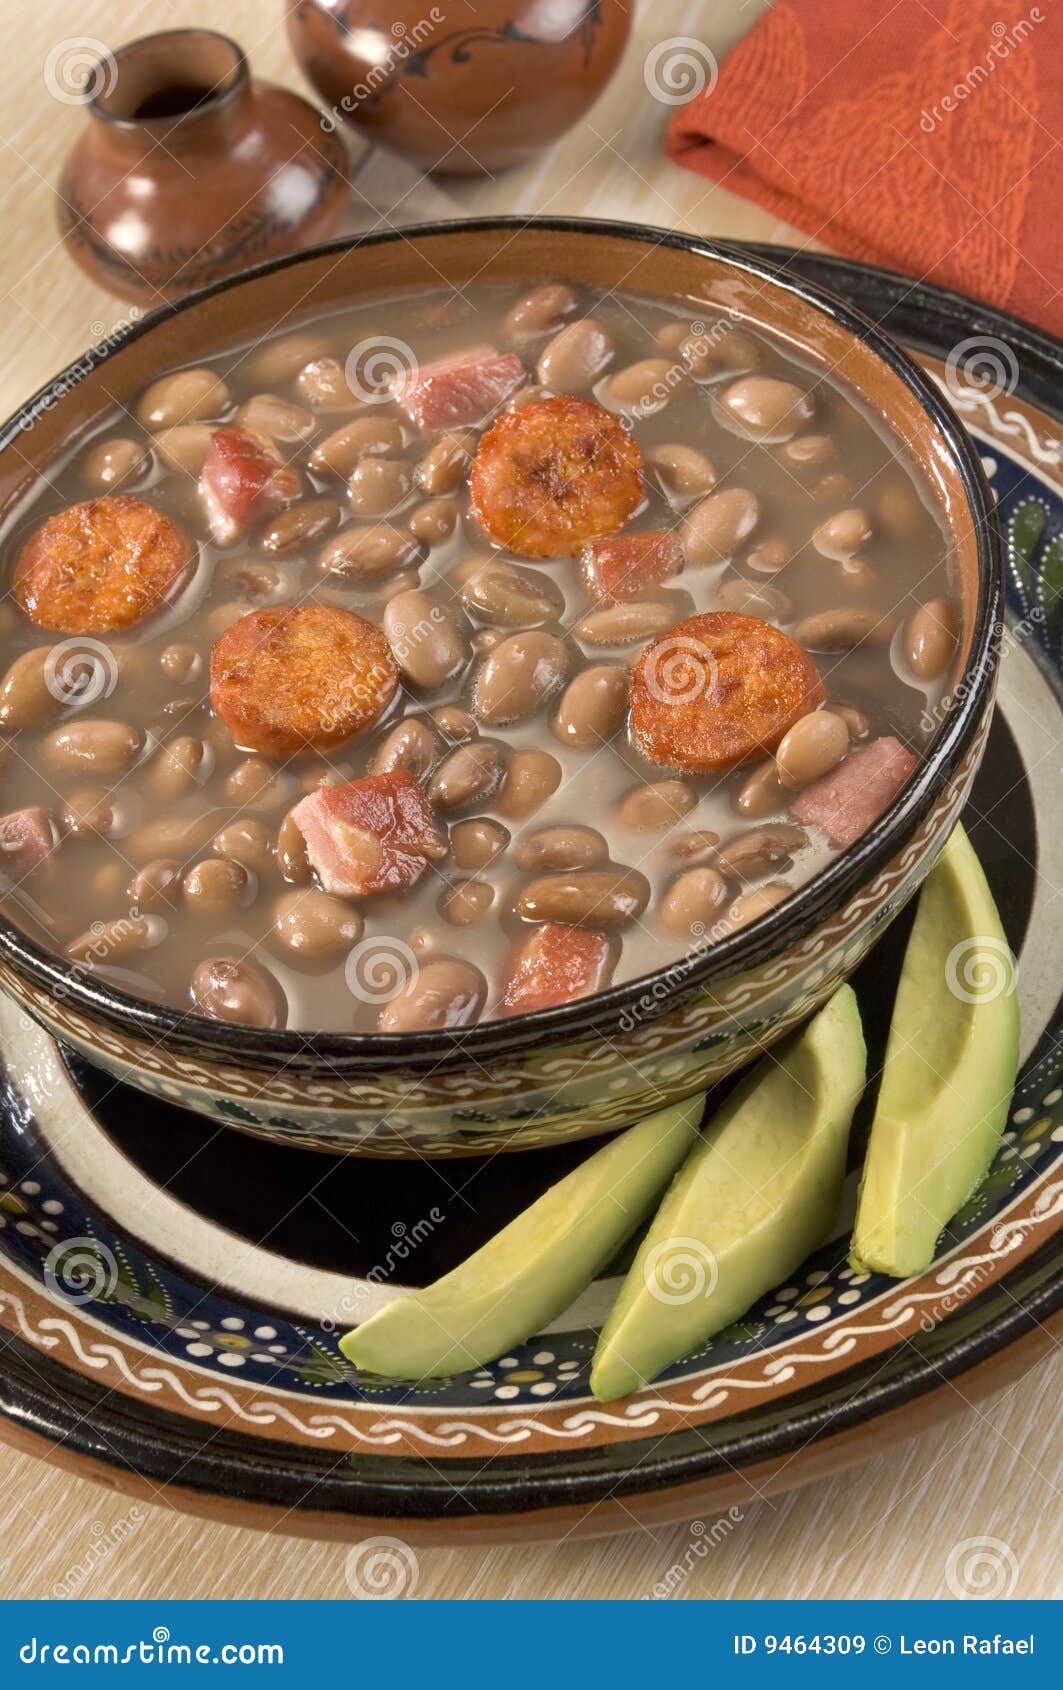 Frijoles Charros or Cowboy Beans Stock Image - Image of clay, soup: 9464309